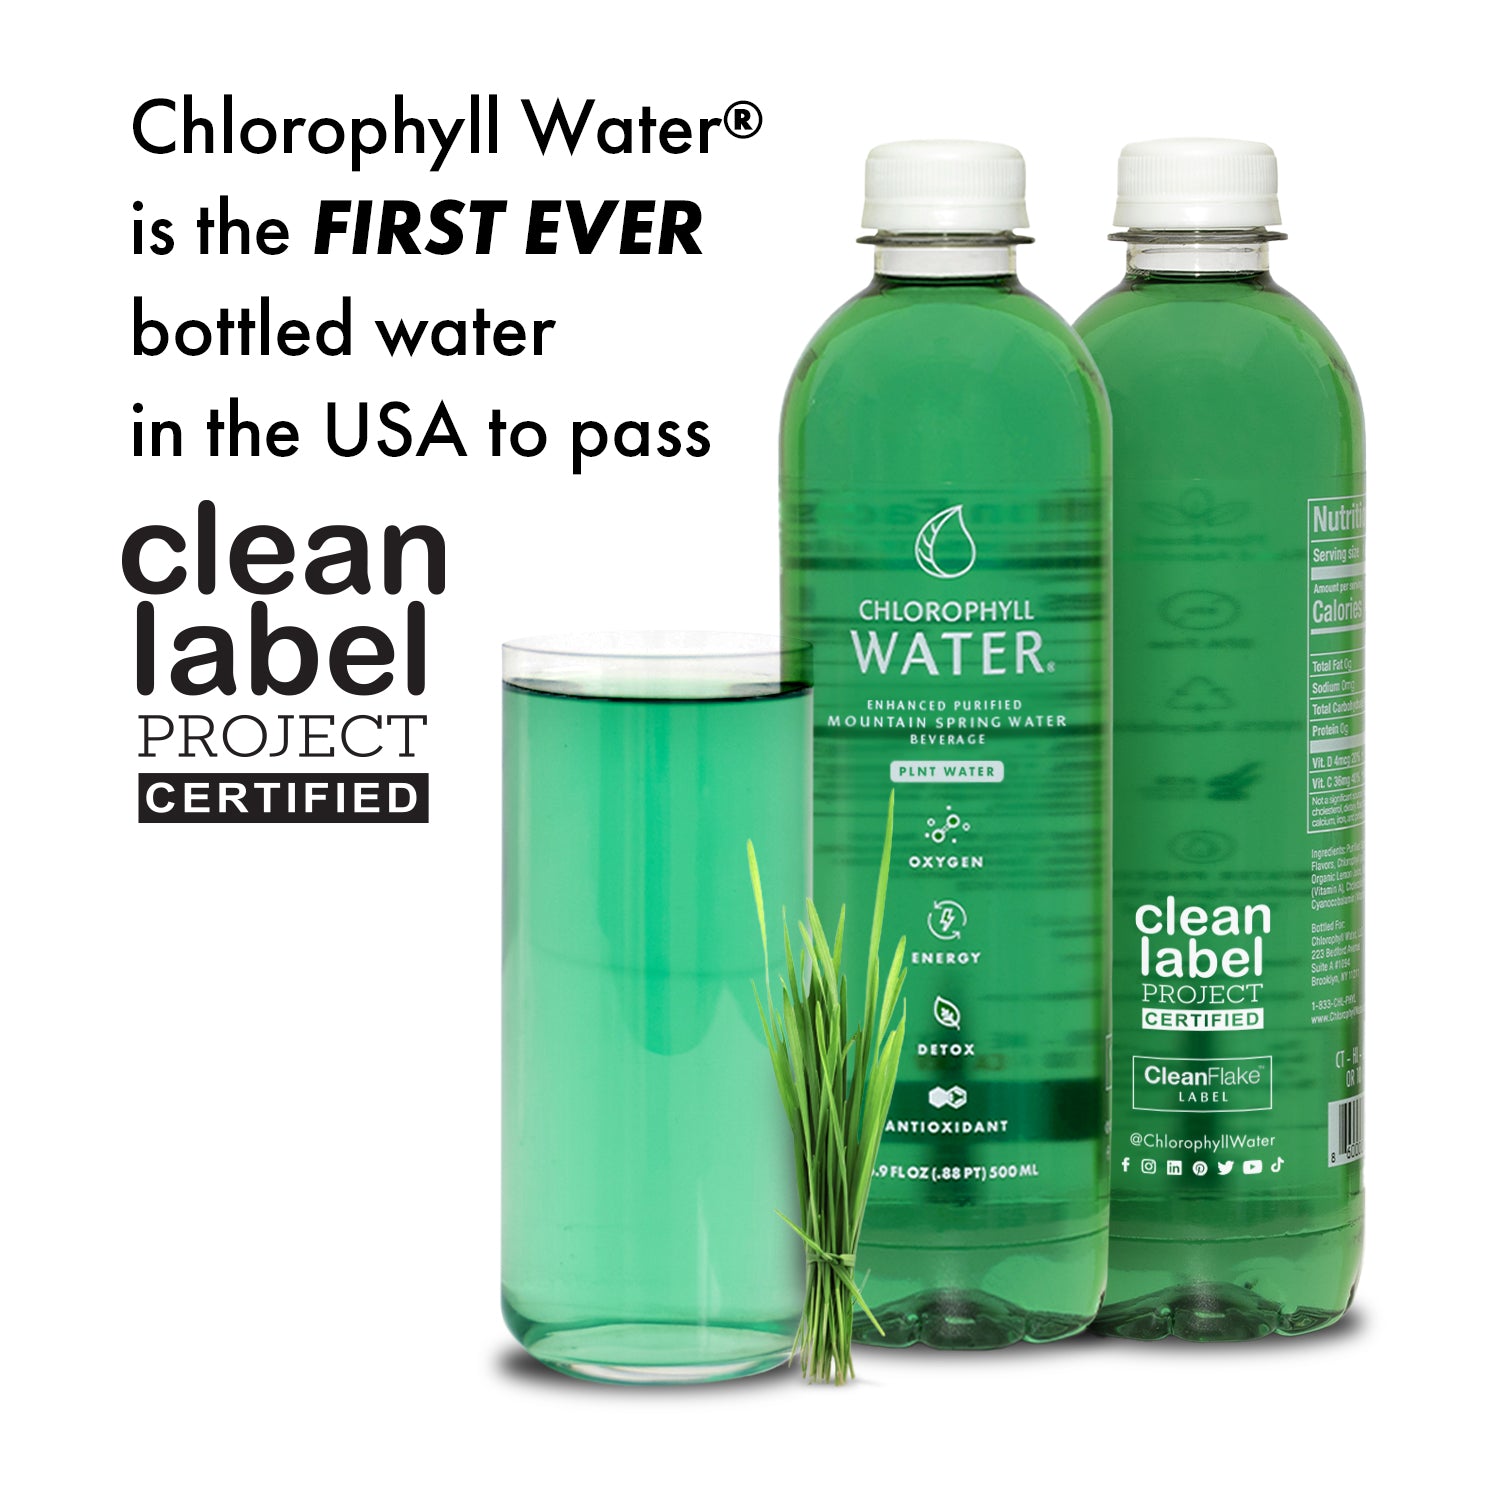 Chlorophyll Water® is the First-Ever Bottled Water in the USA to Receive Clean Label Project Certification [Food Dive]